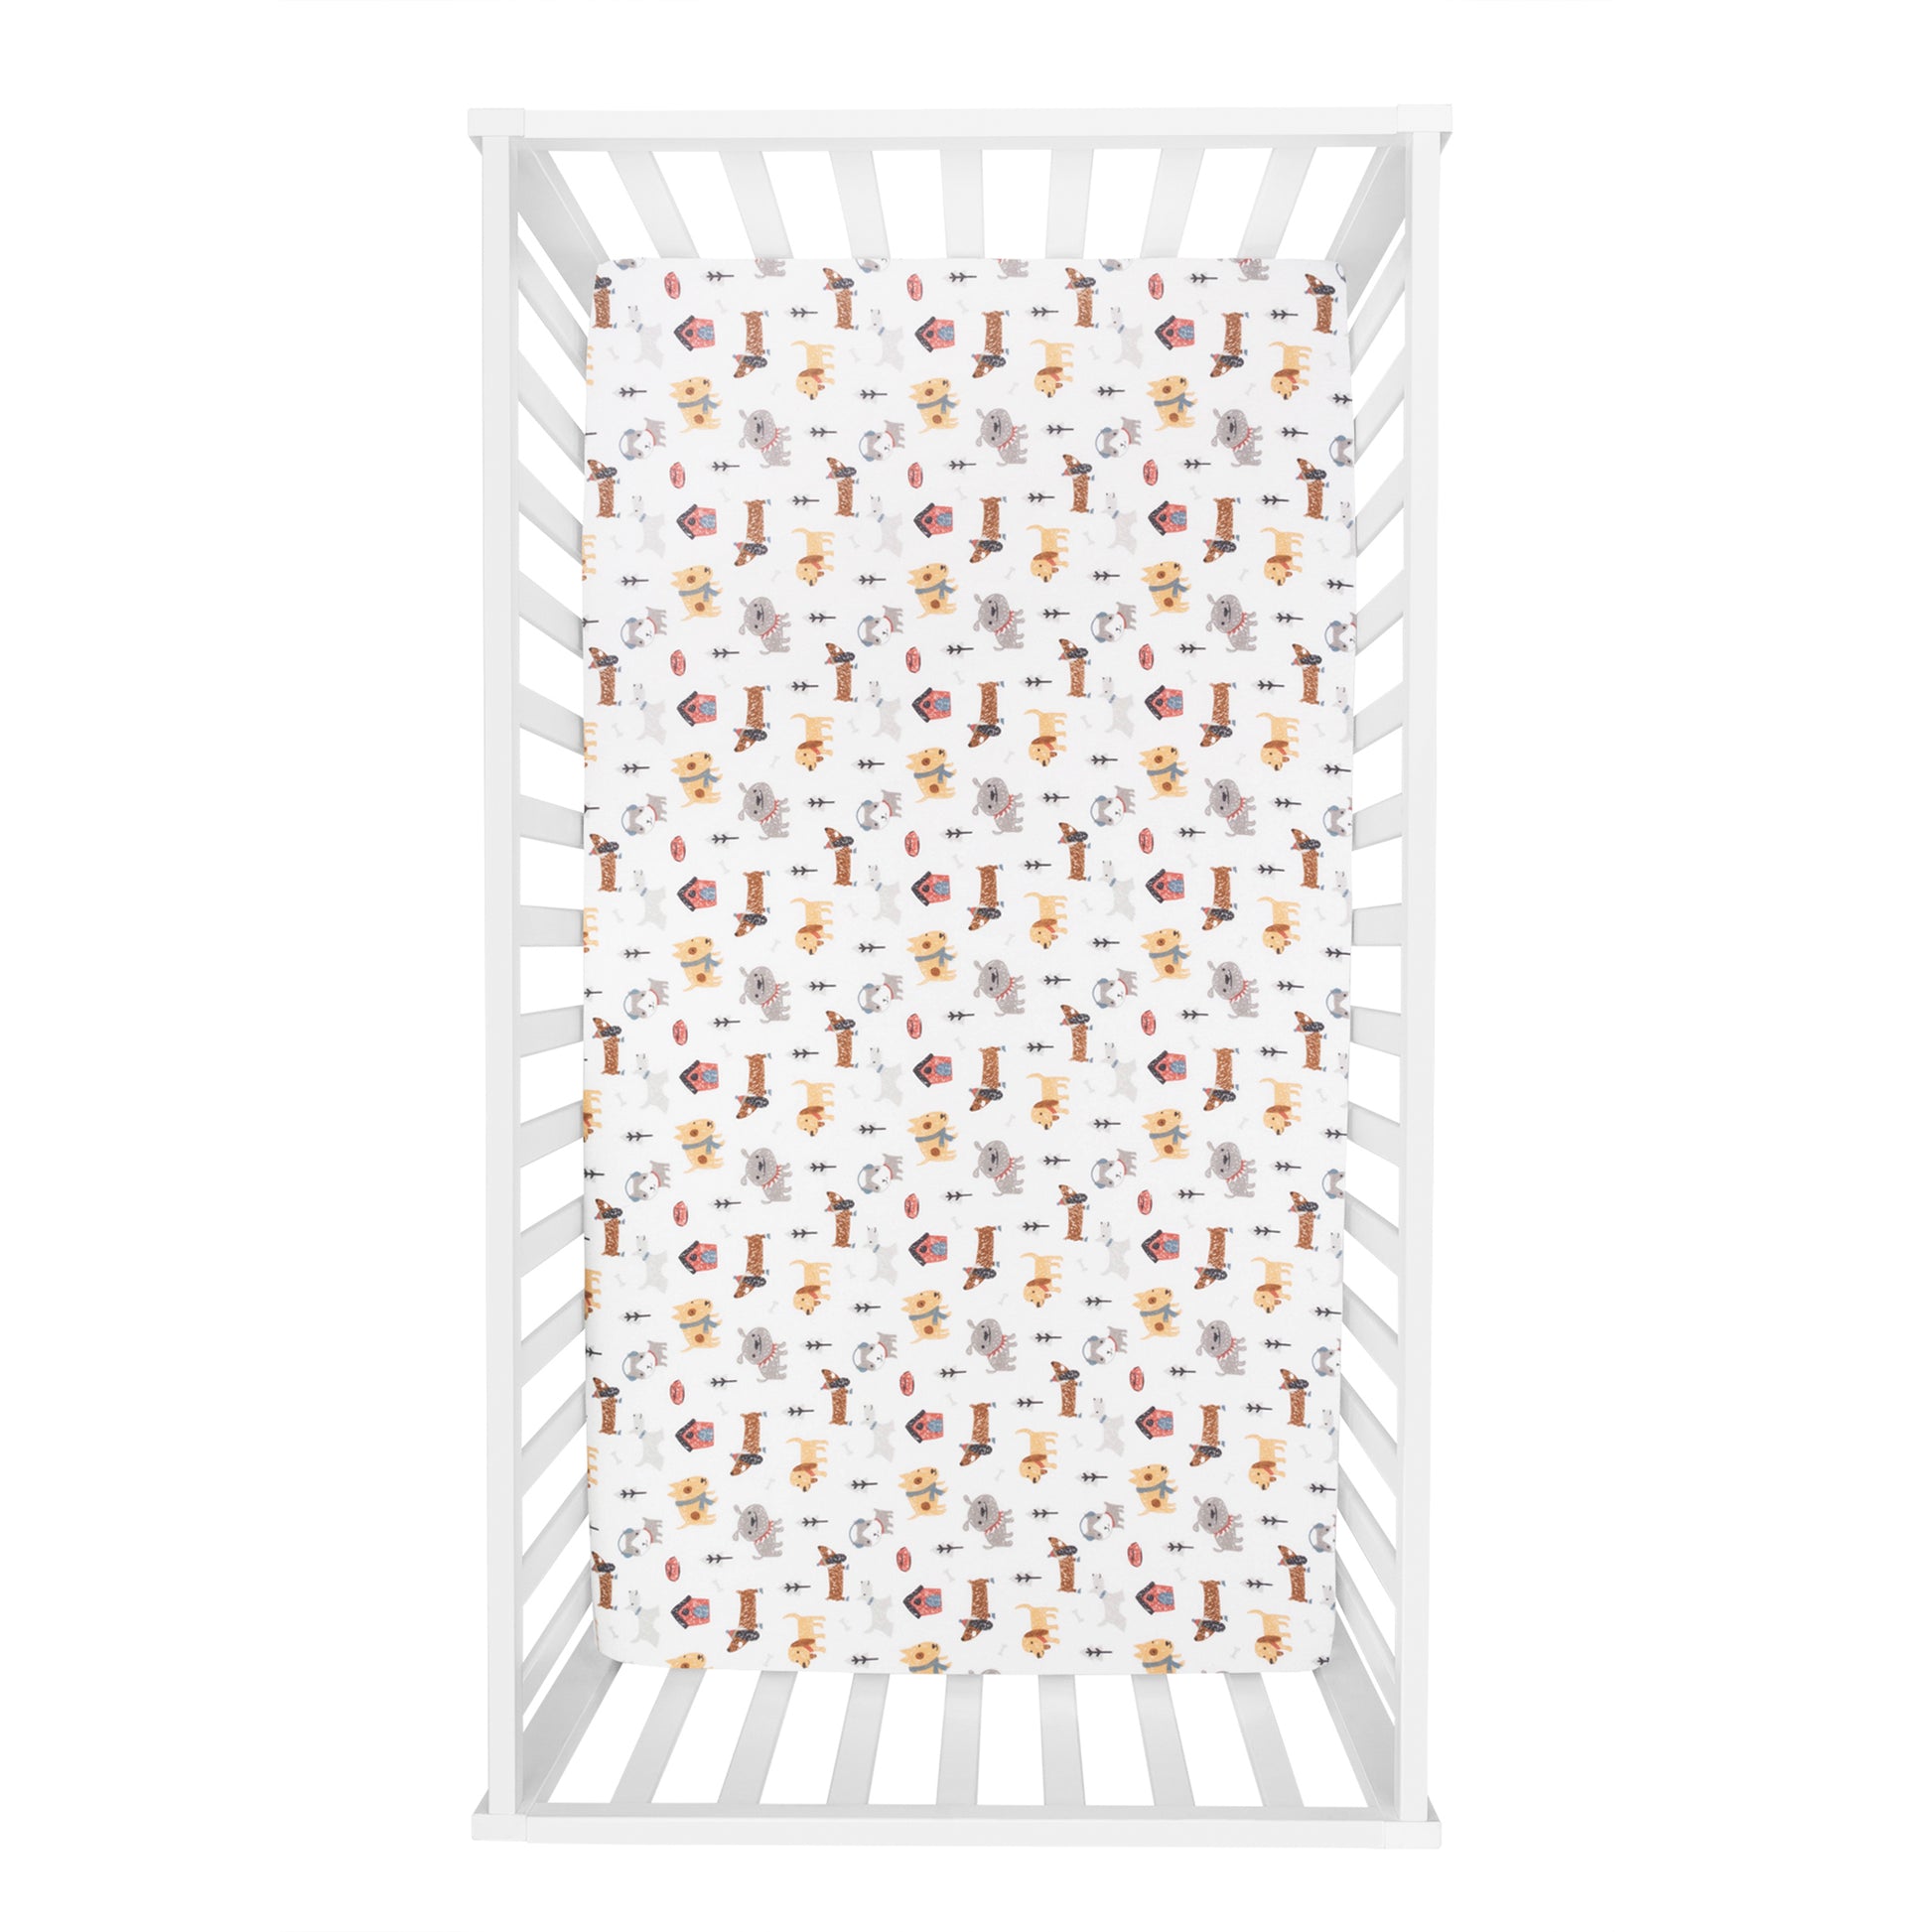  Dog Park Deluxe Flannel Crib Sheet- overhead view